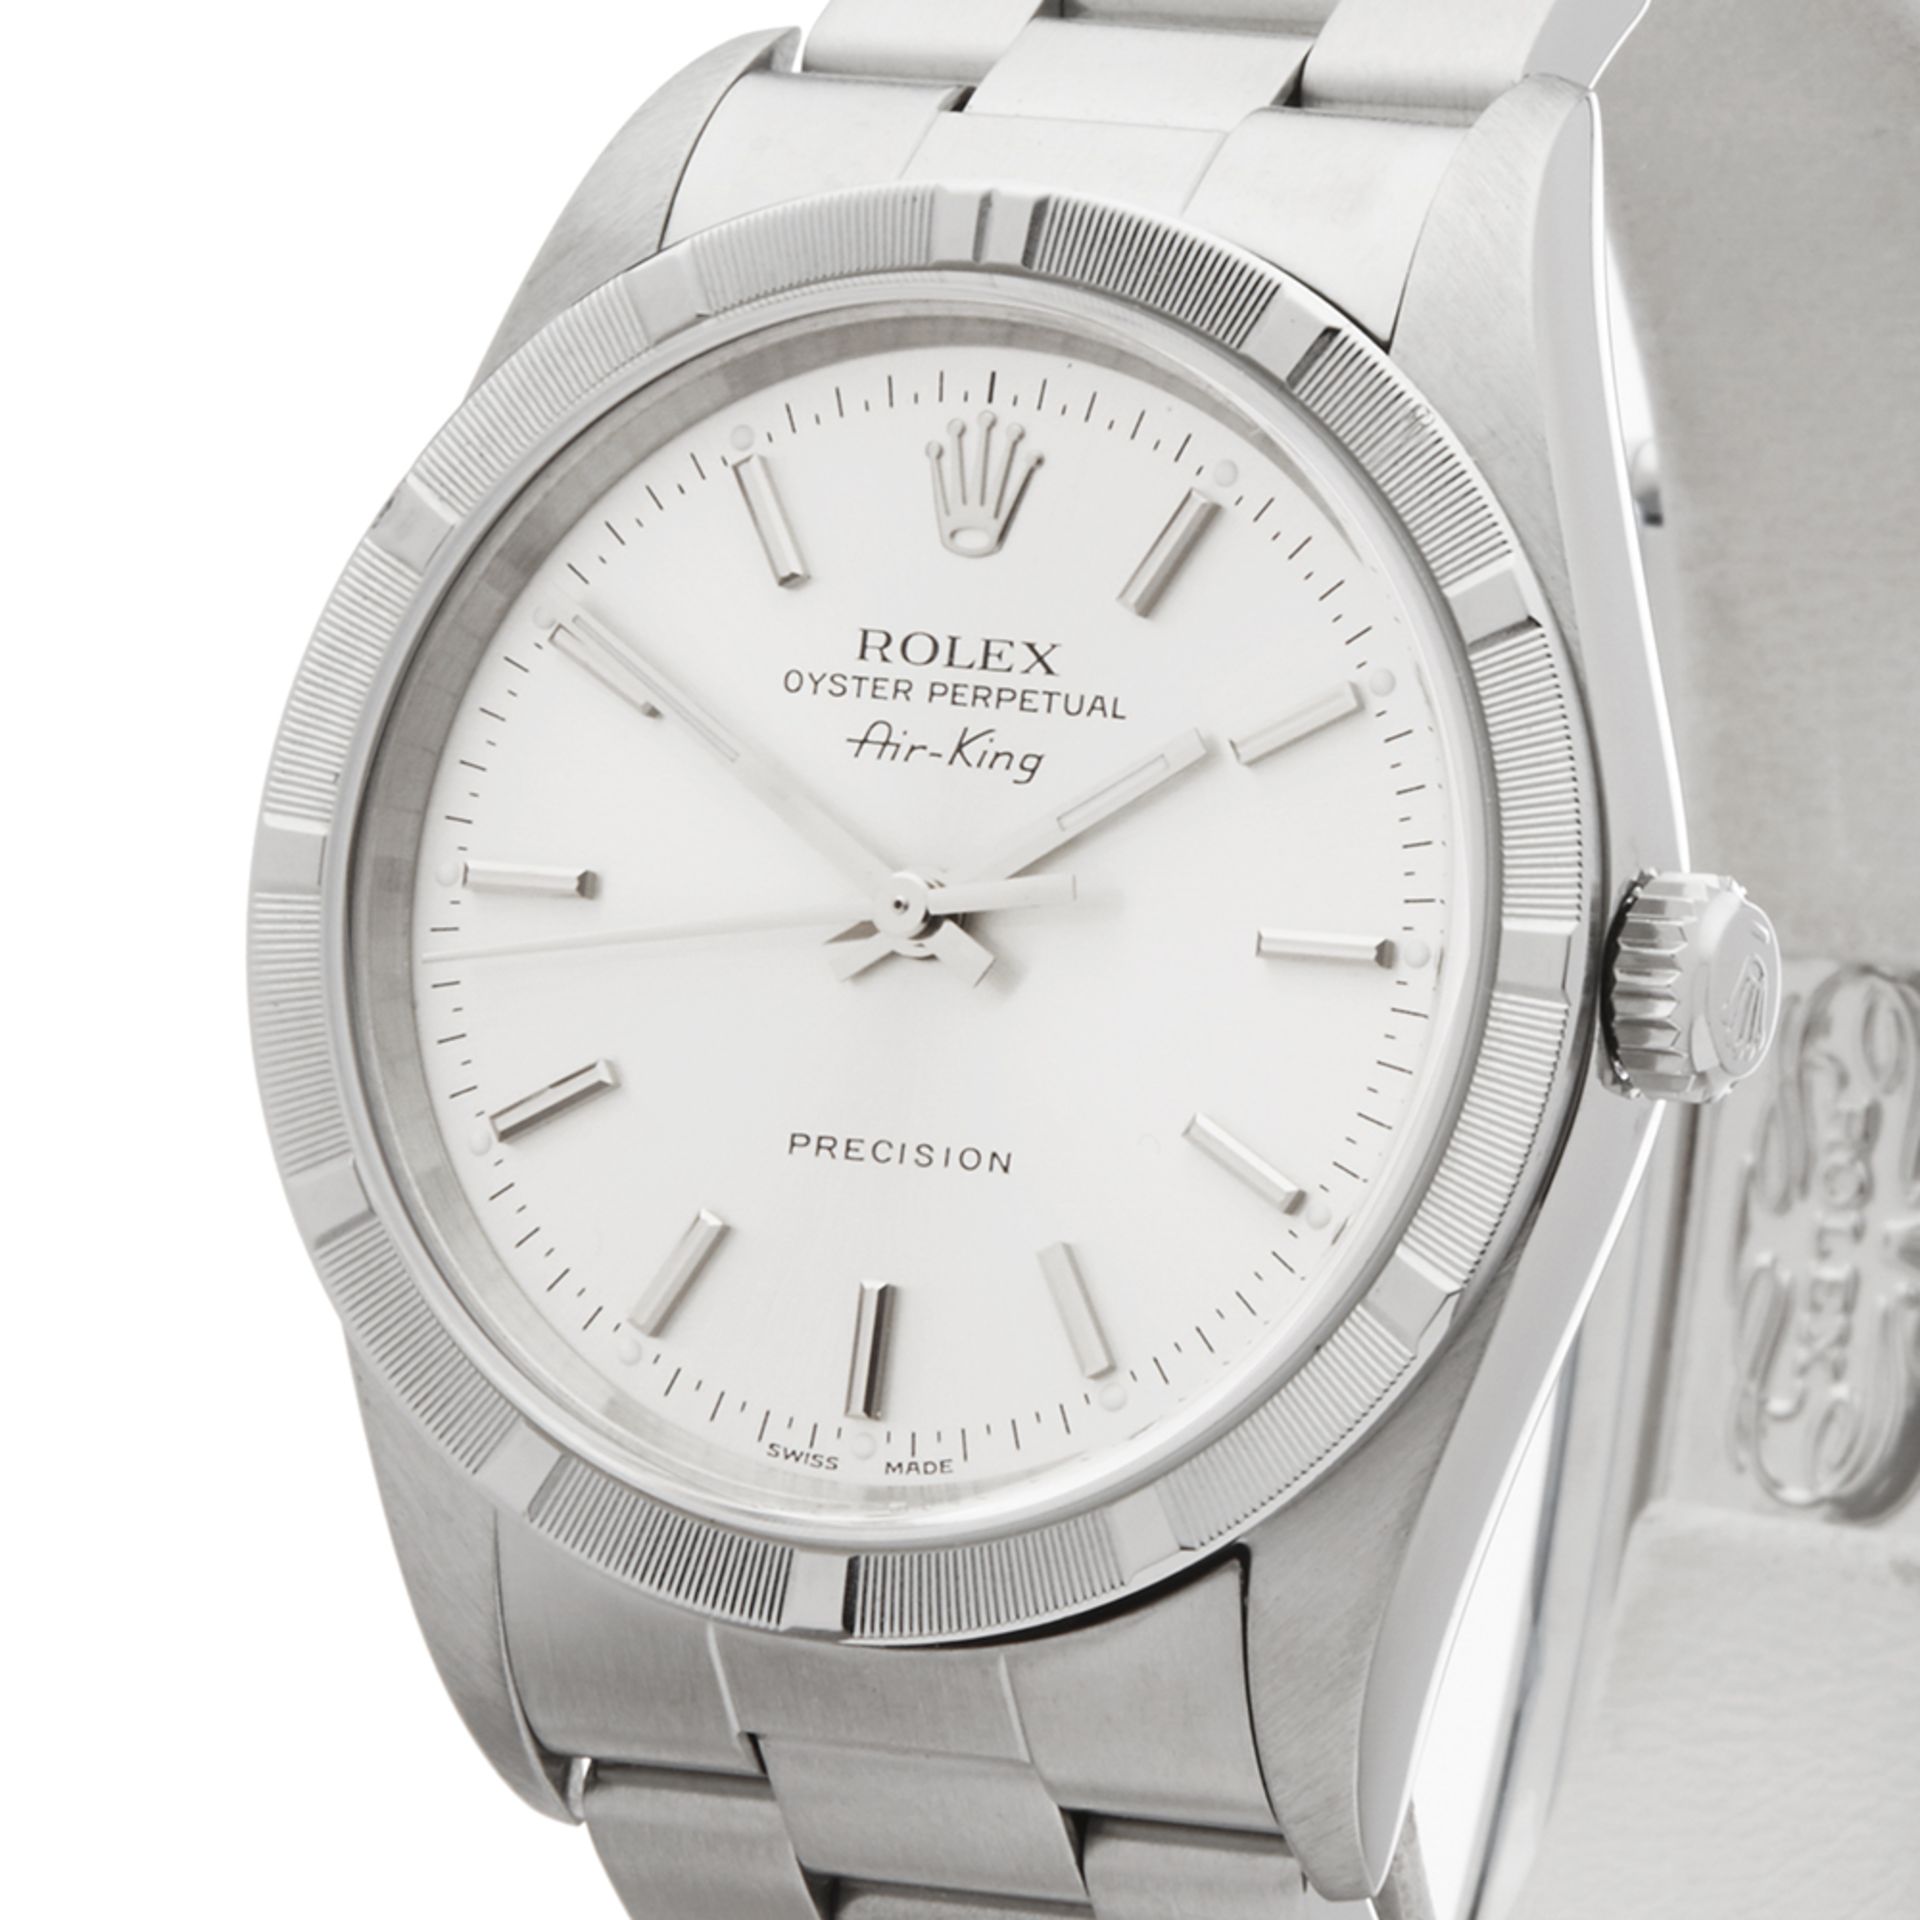 2001 Rolex Air King 34 Stainless Steel - 14010 - Image 7 of 8